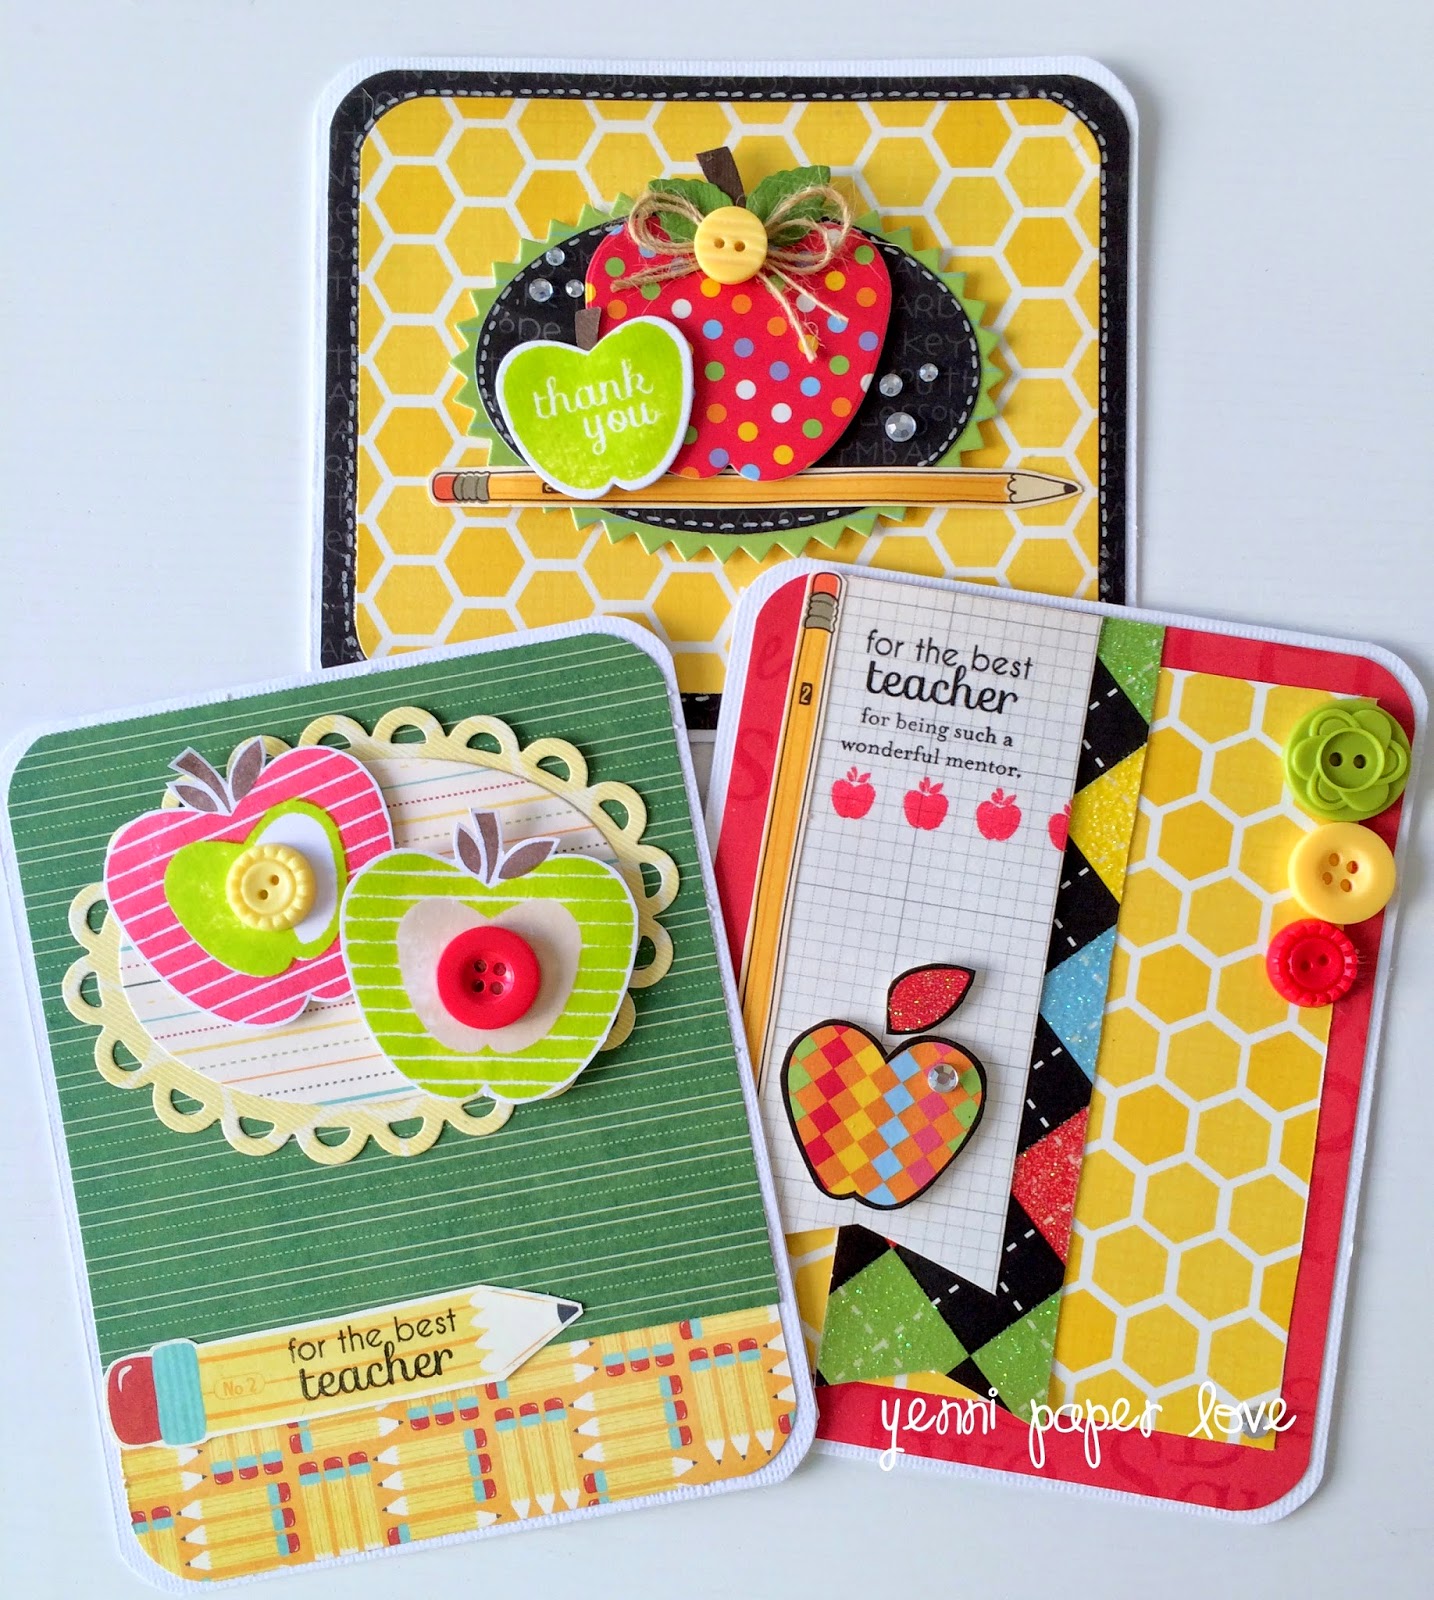 Teacher's day cards and bookmark - Yenni Paper Love